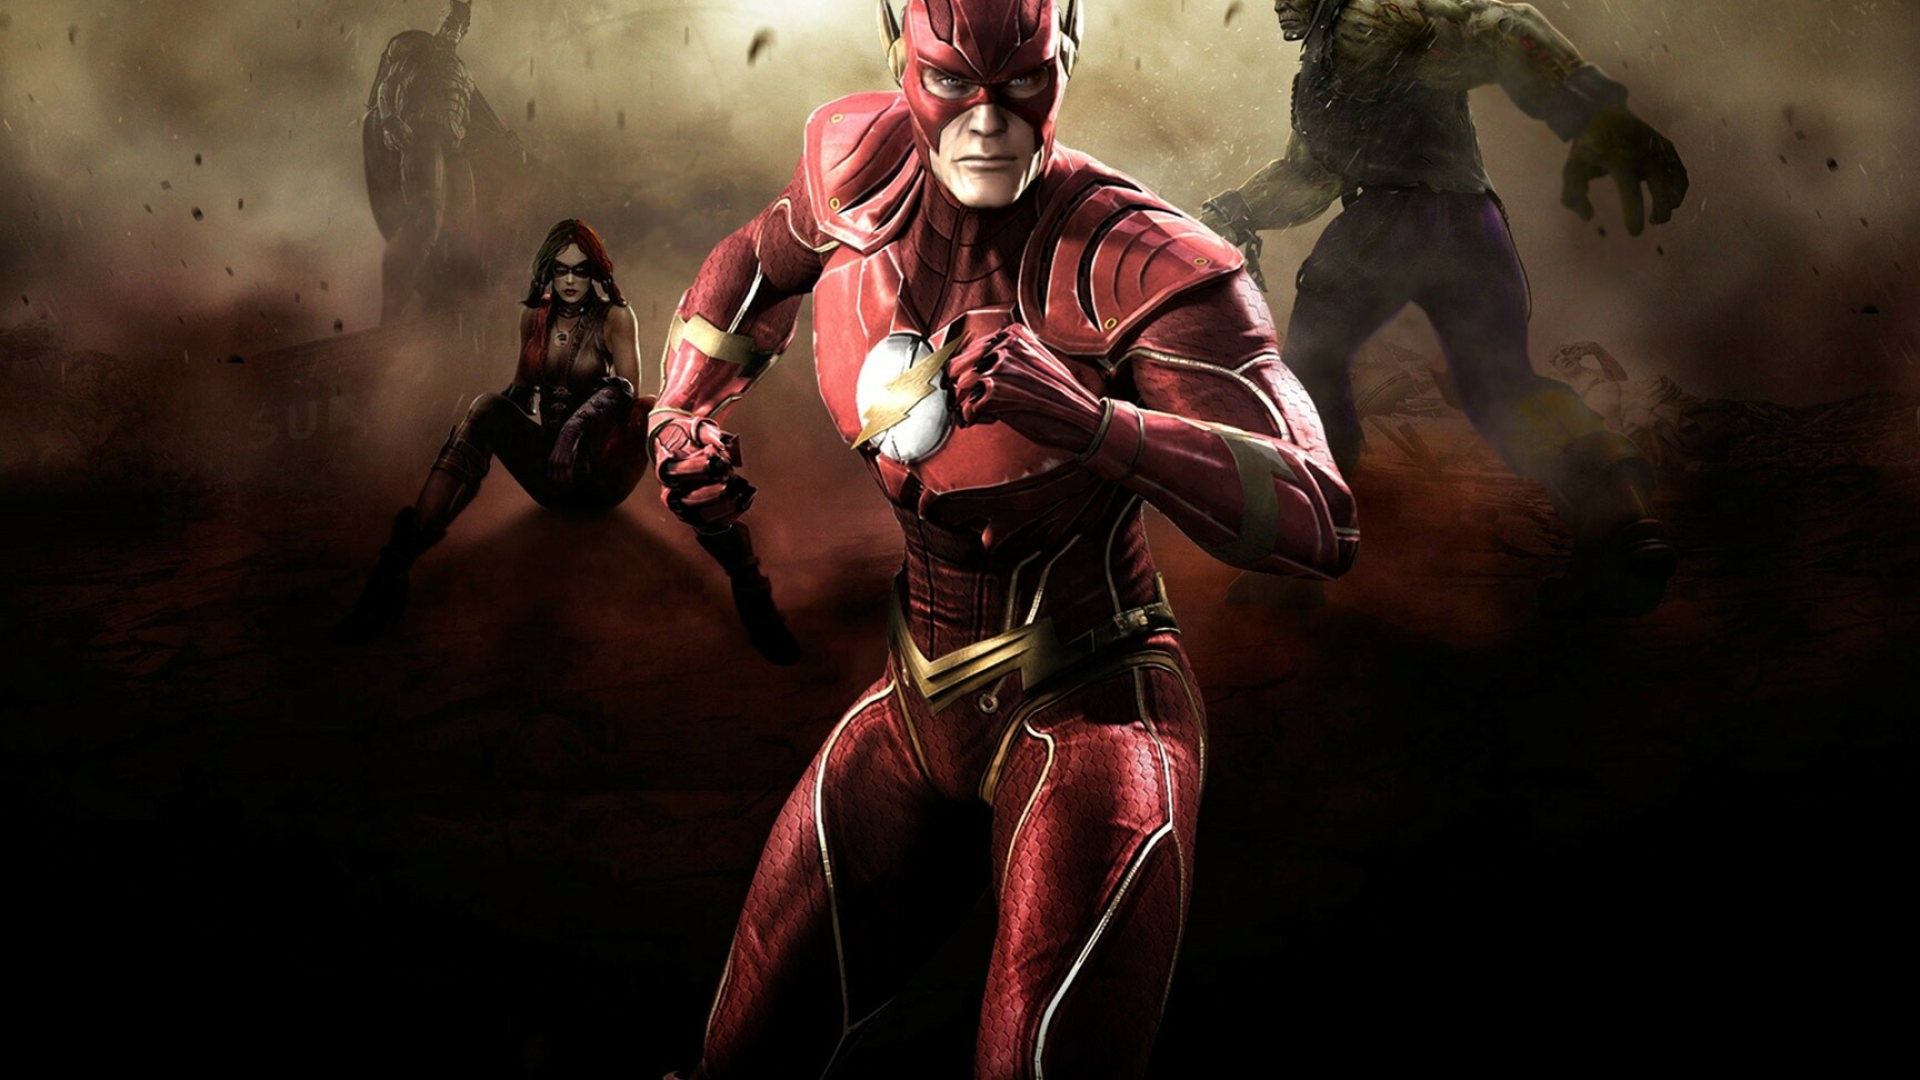 Injustice: Gods Among Us, Flash, A superhero appearing in American comic books published by DC Comics. 1920x1080 Full HD Background.